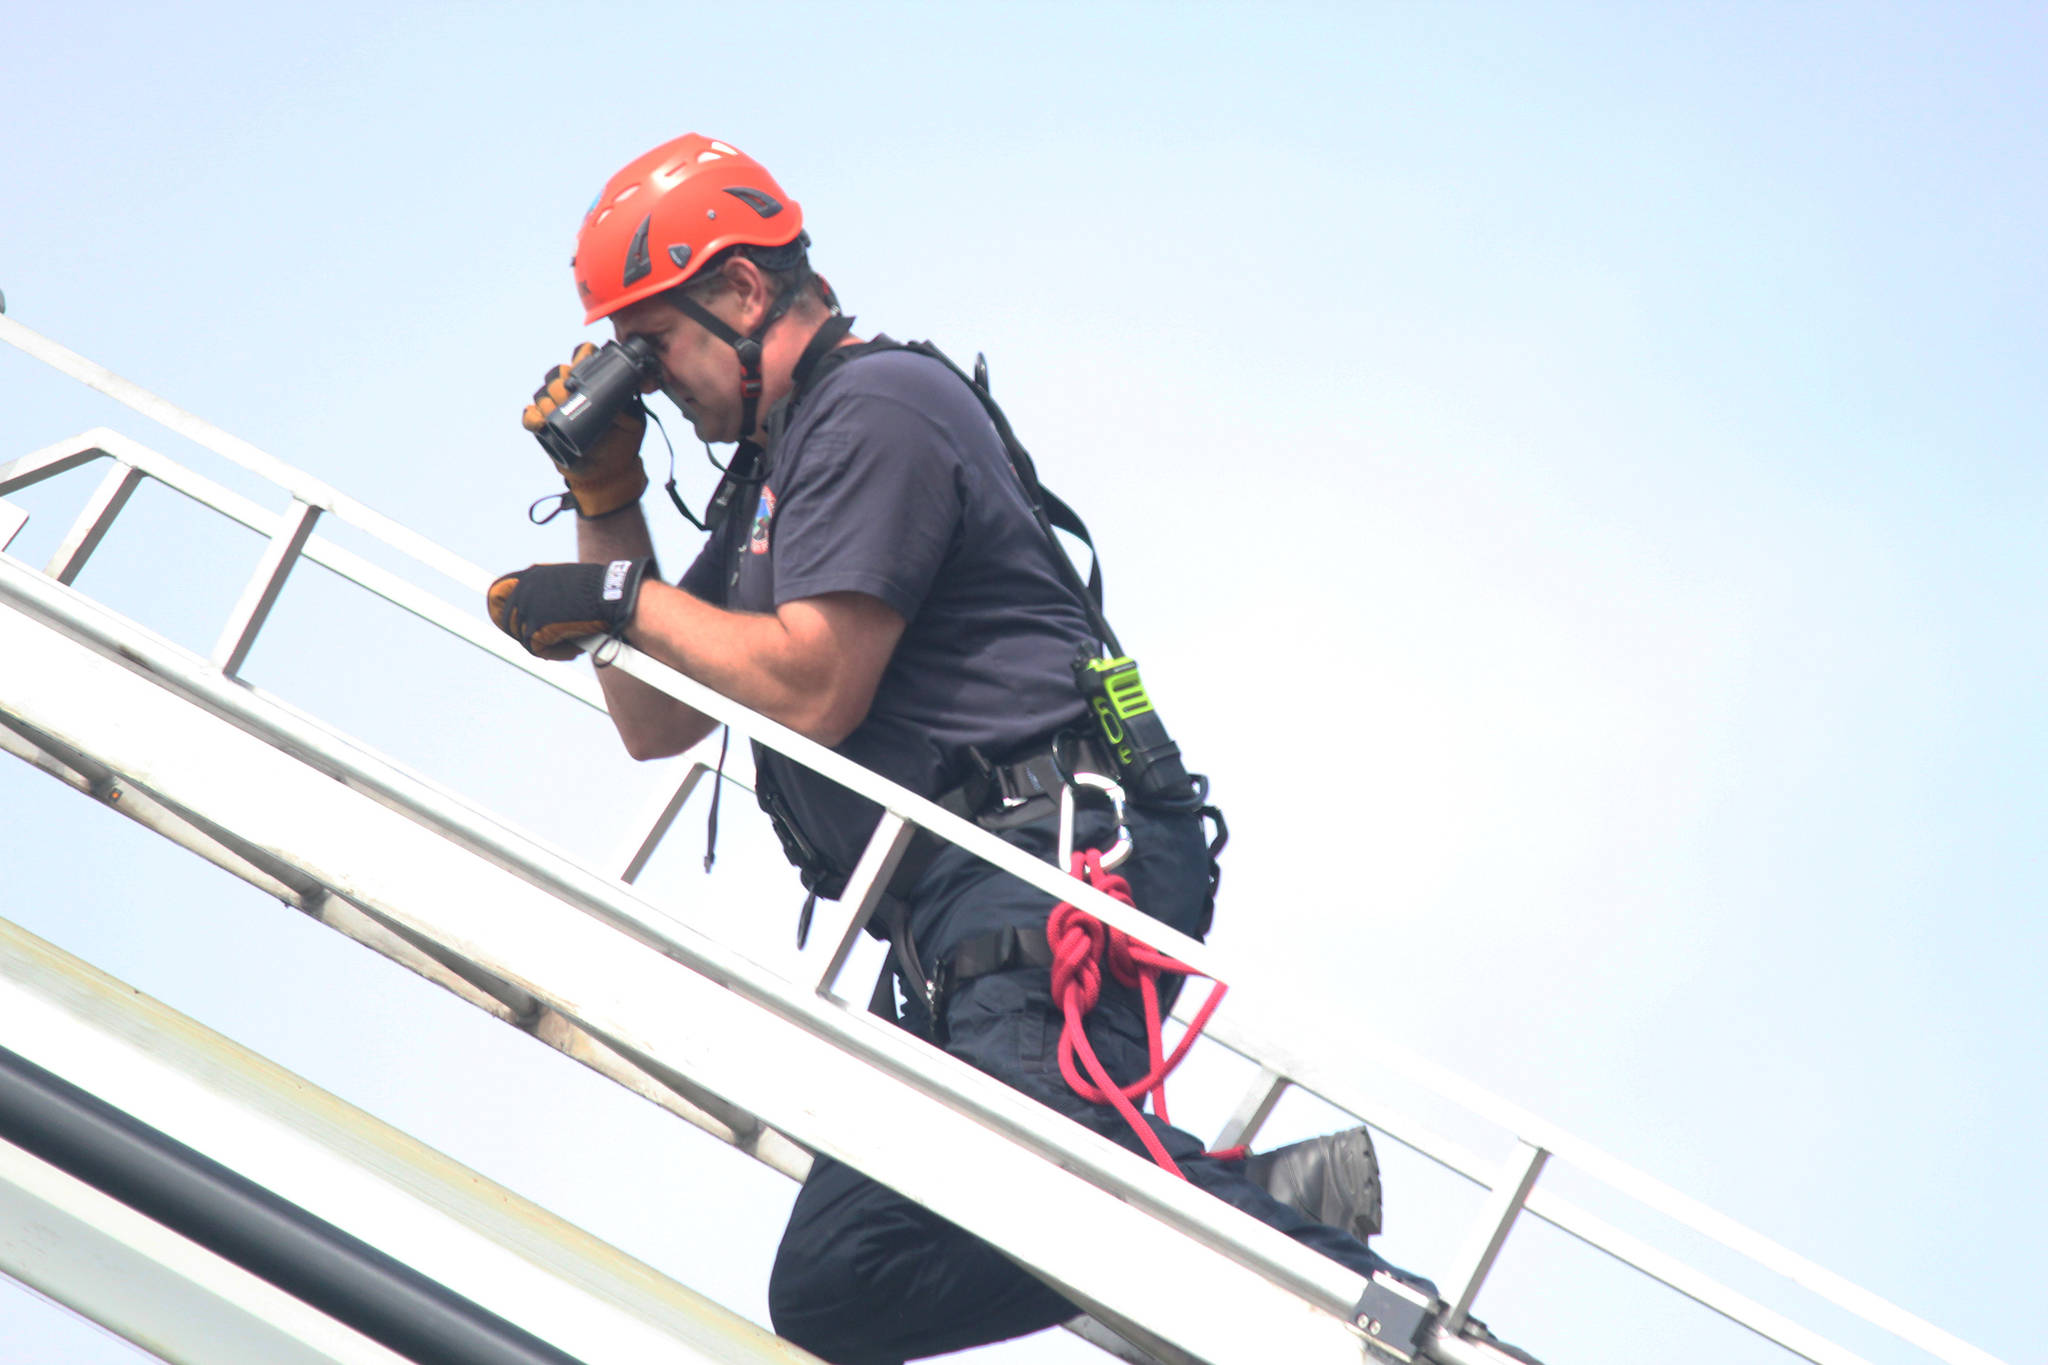 Joe Sallee, Deputy Chief at Kachemak Emergency Services, uses binoculars at the end of a ladder extended from the KES ladder truck to search the slope near Baycrest Overlook on Monday, July 24, 2017 in Homer, Alaska. First responders found a pickup truck that had fallen over the edge after hitting a guard rail, and searched for a possible victim until getting a report that the driver had crashed several days earlier and had walked away uninjured.  Photo by Megan Pacer/Homer News